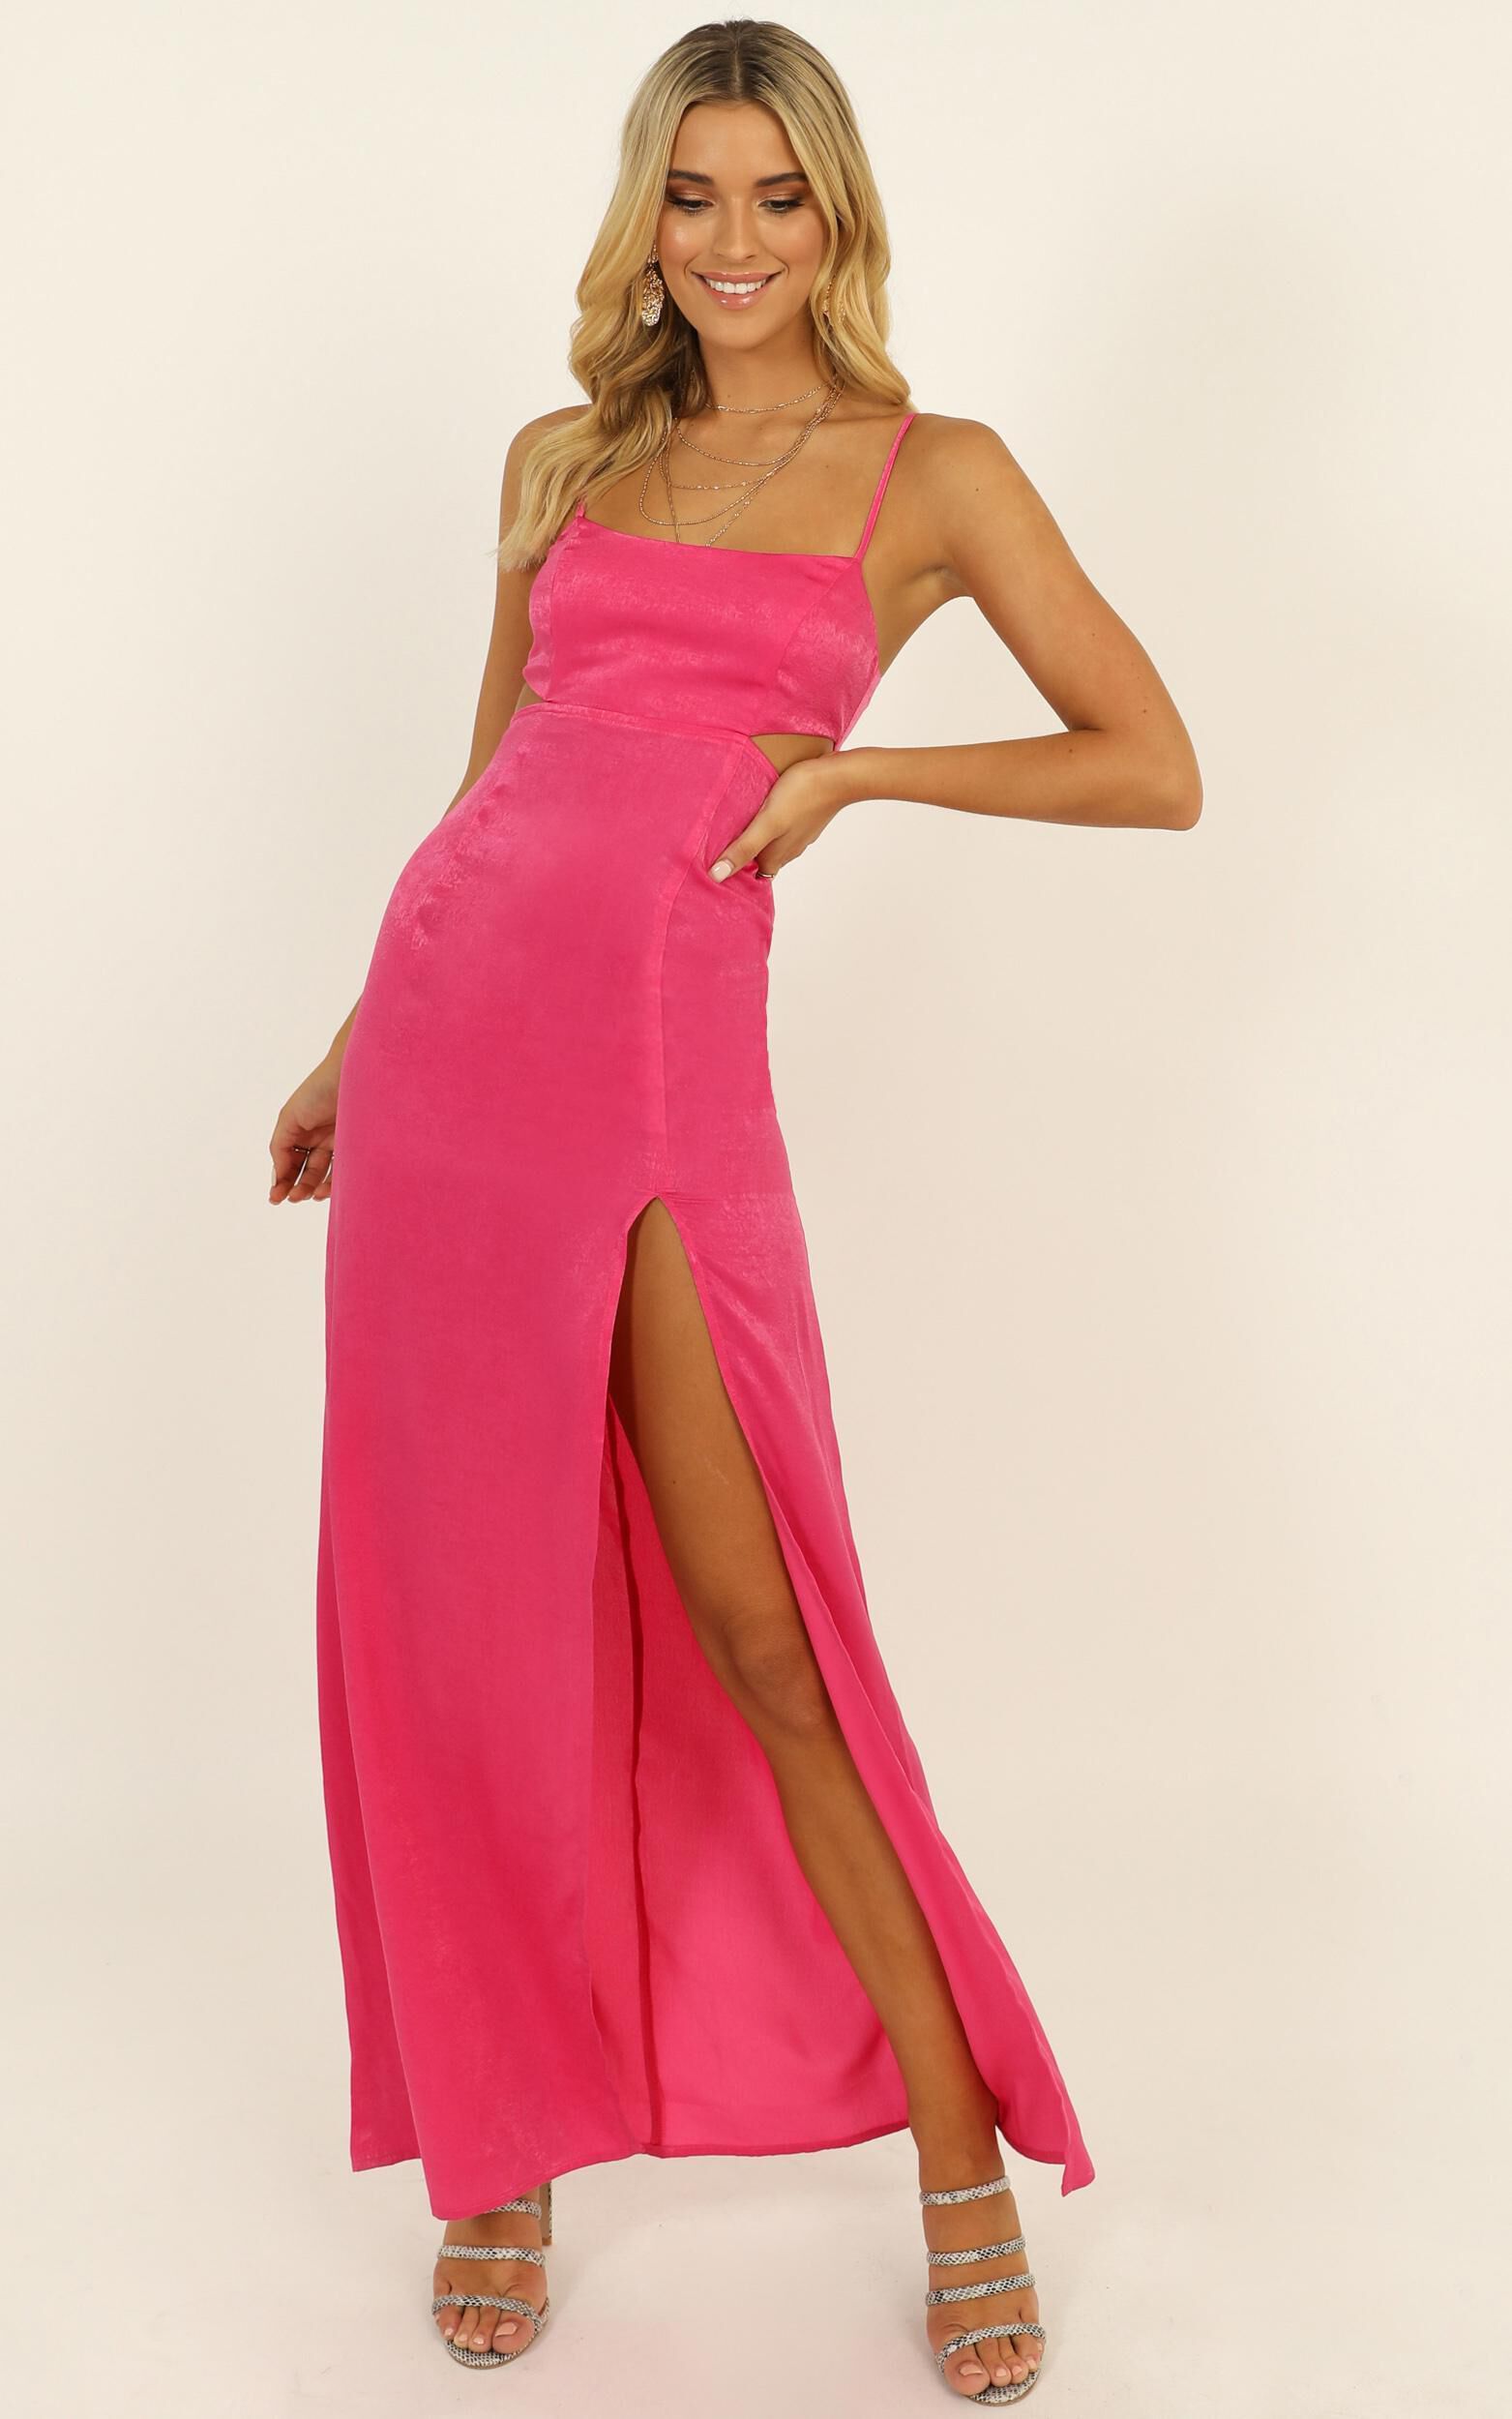 A Special Mention Dress In Hot Pink ...